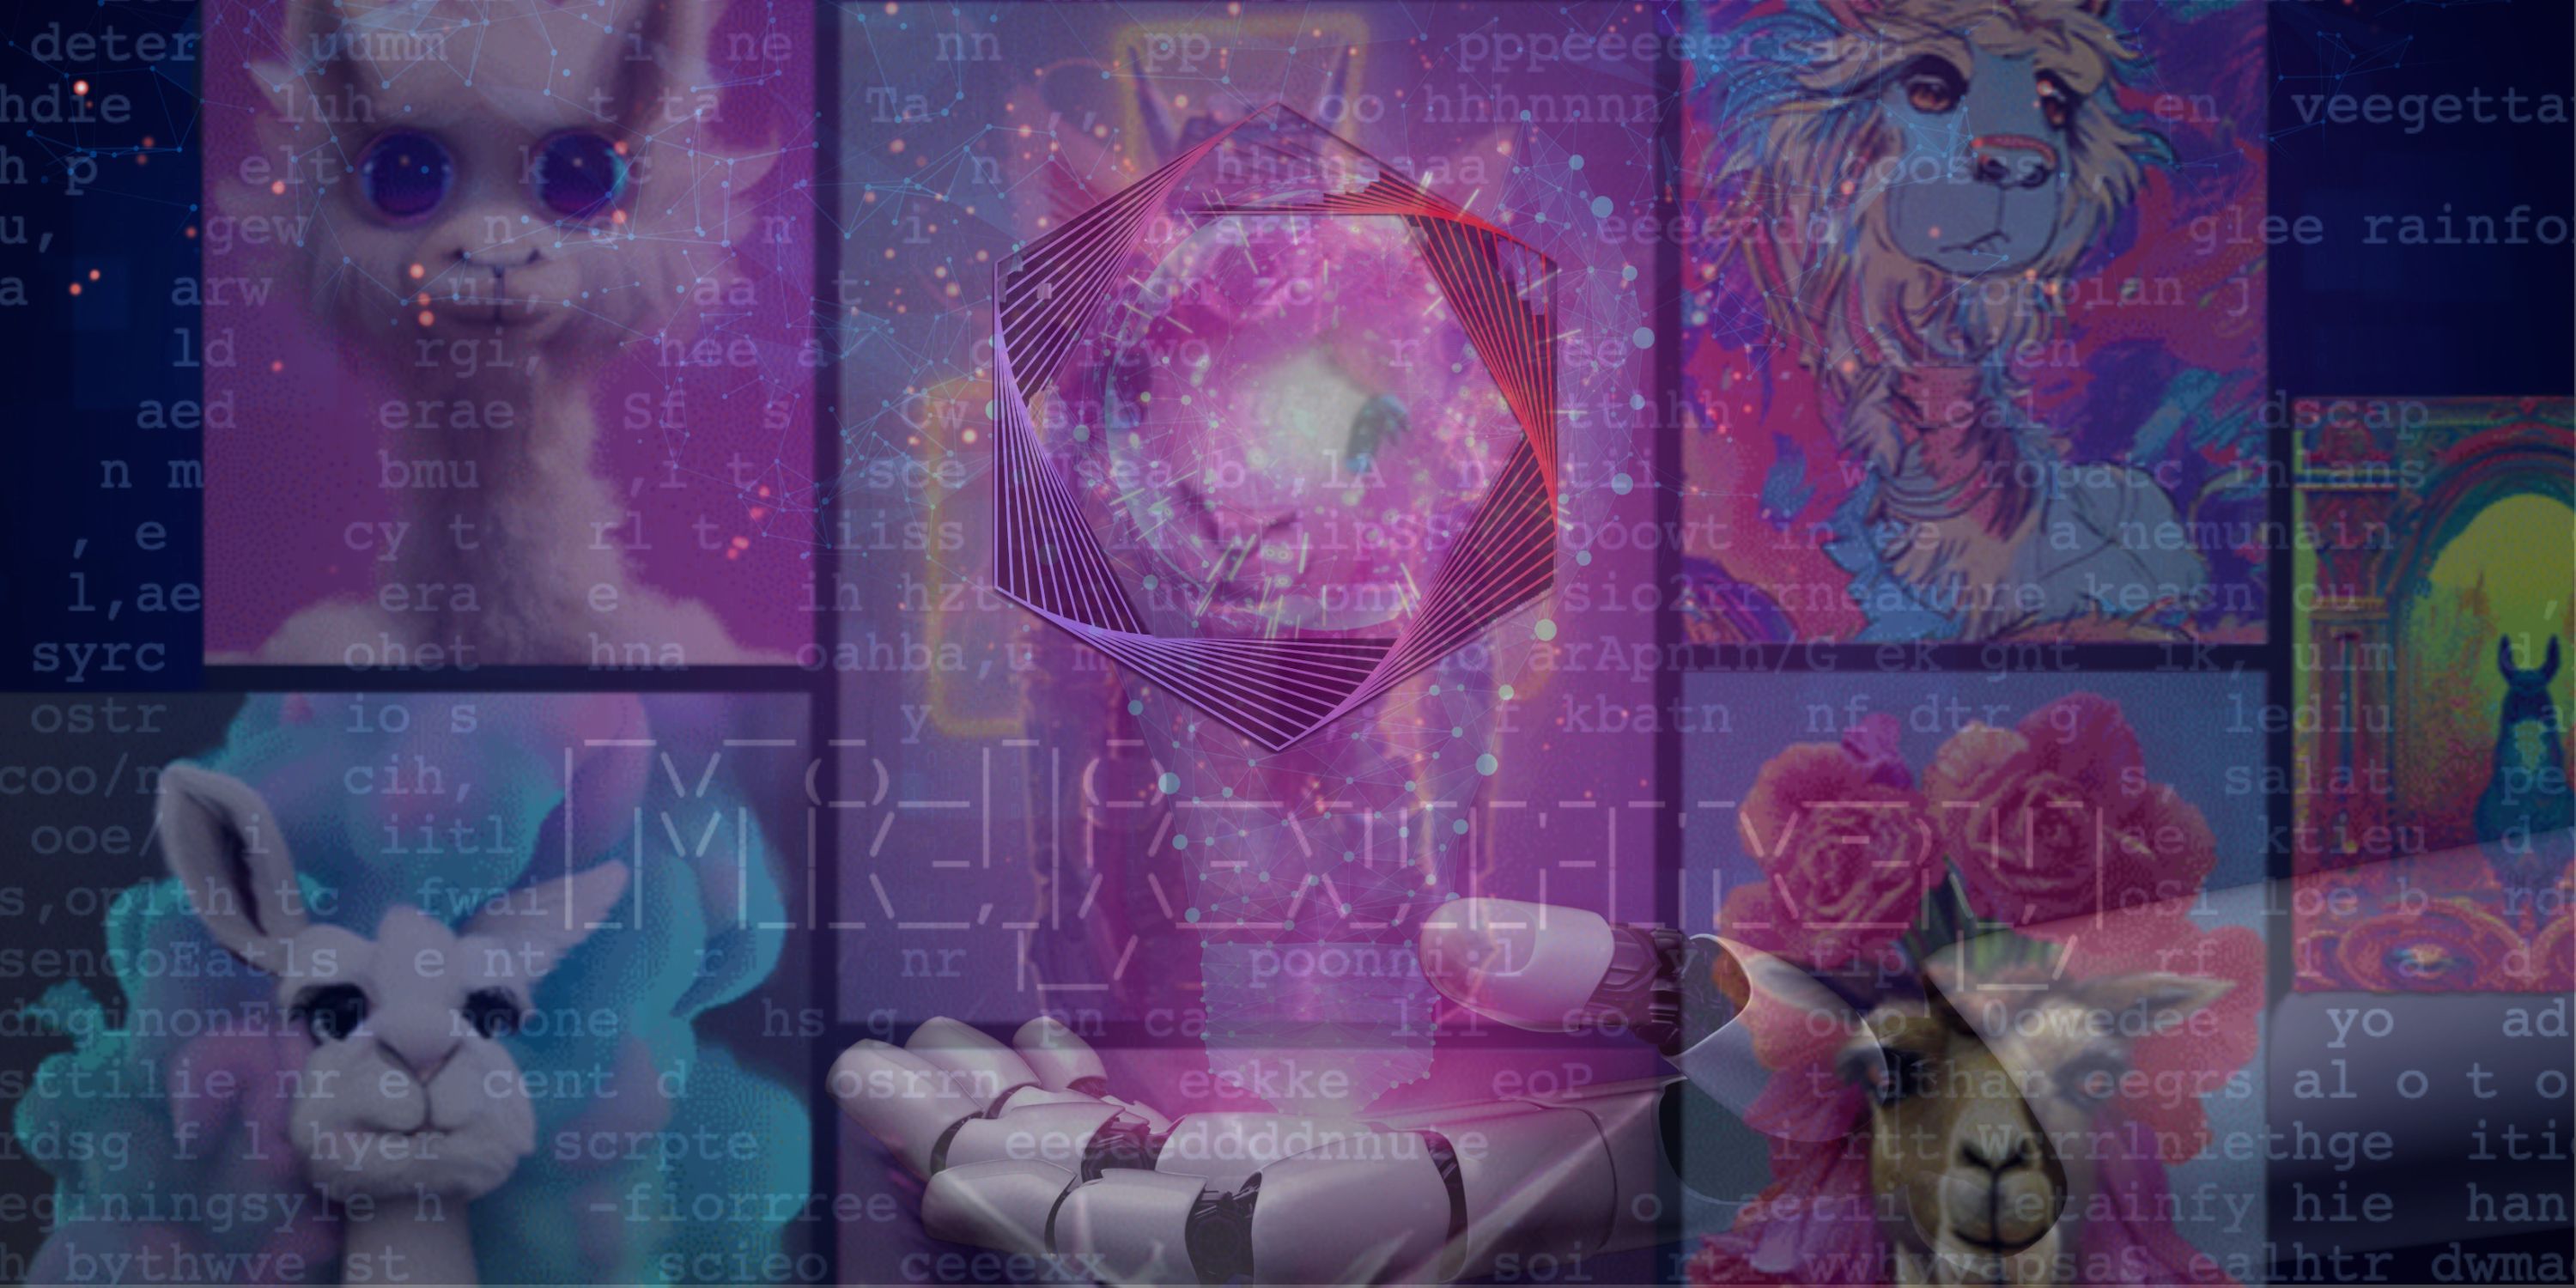 A mashup of images from DeviantArt's Dreamup, along with the StabilityAI and Midjourney logos 